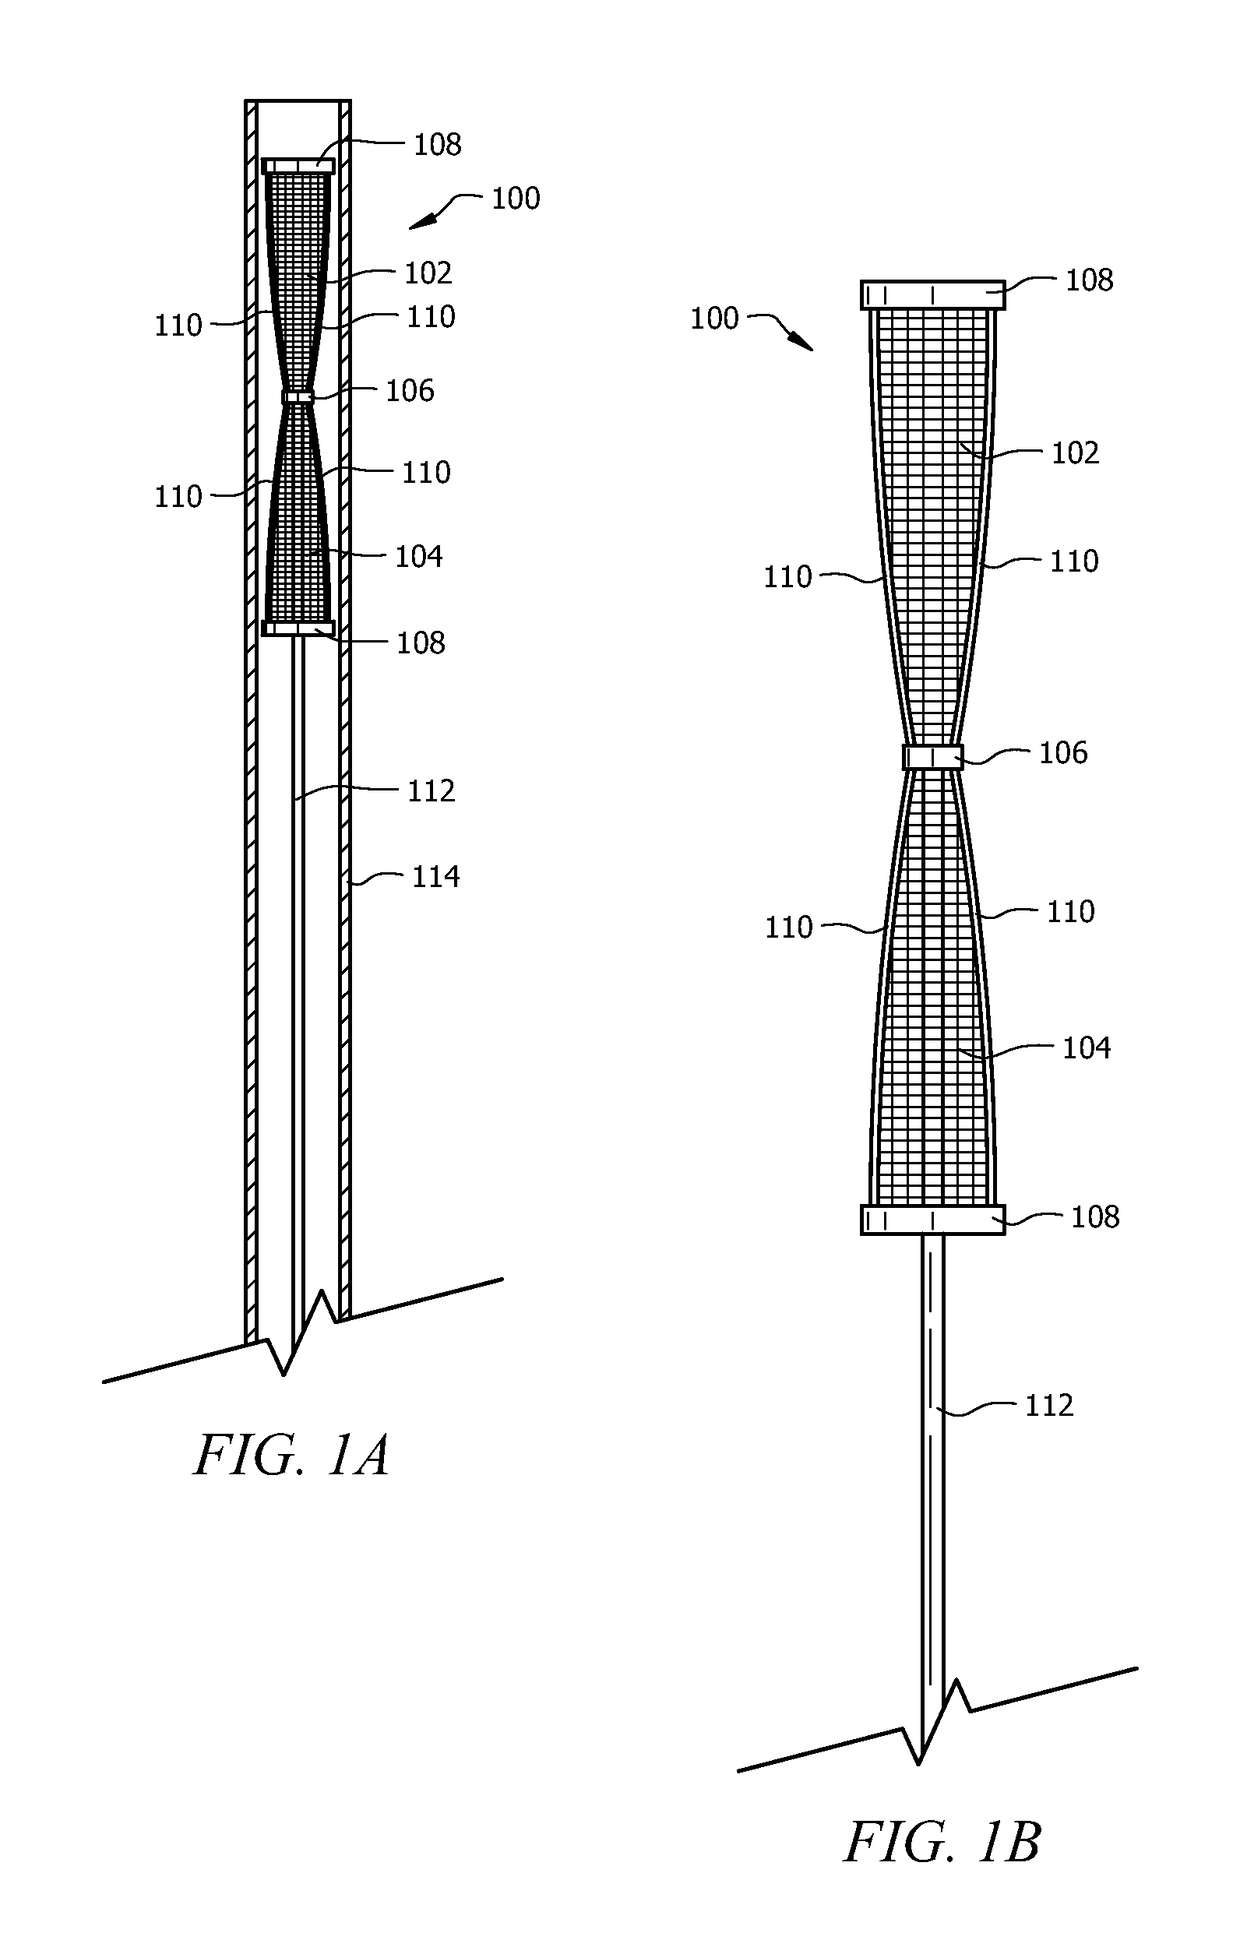 Advanced endovascular clip and method of using same